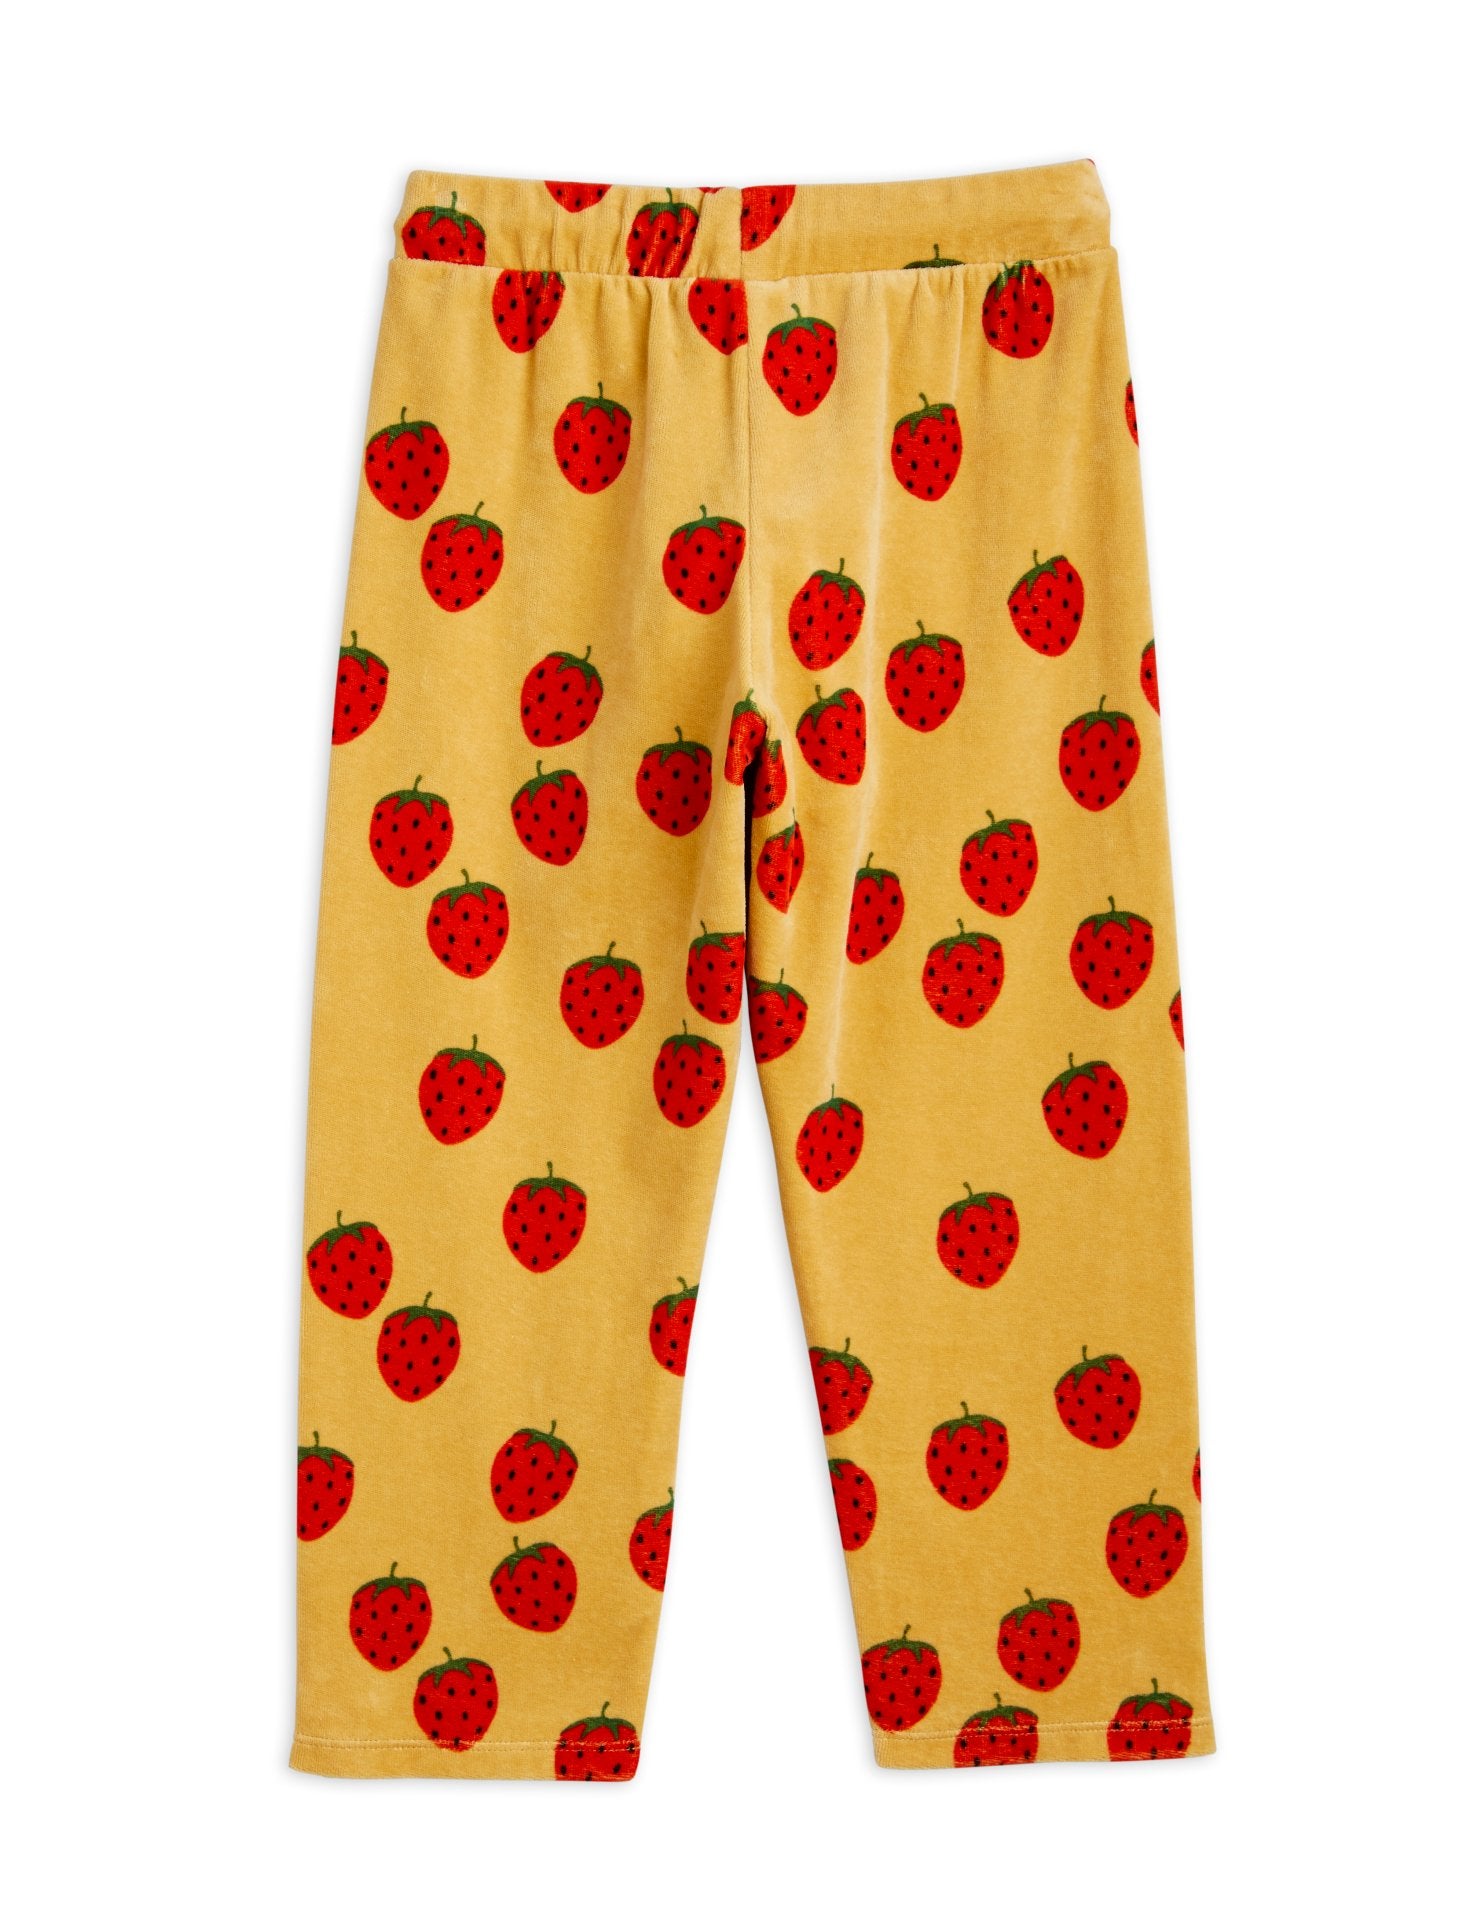 Strawberries velour aop trousers